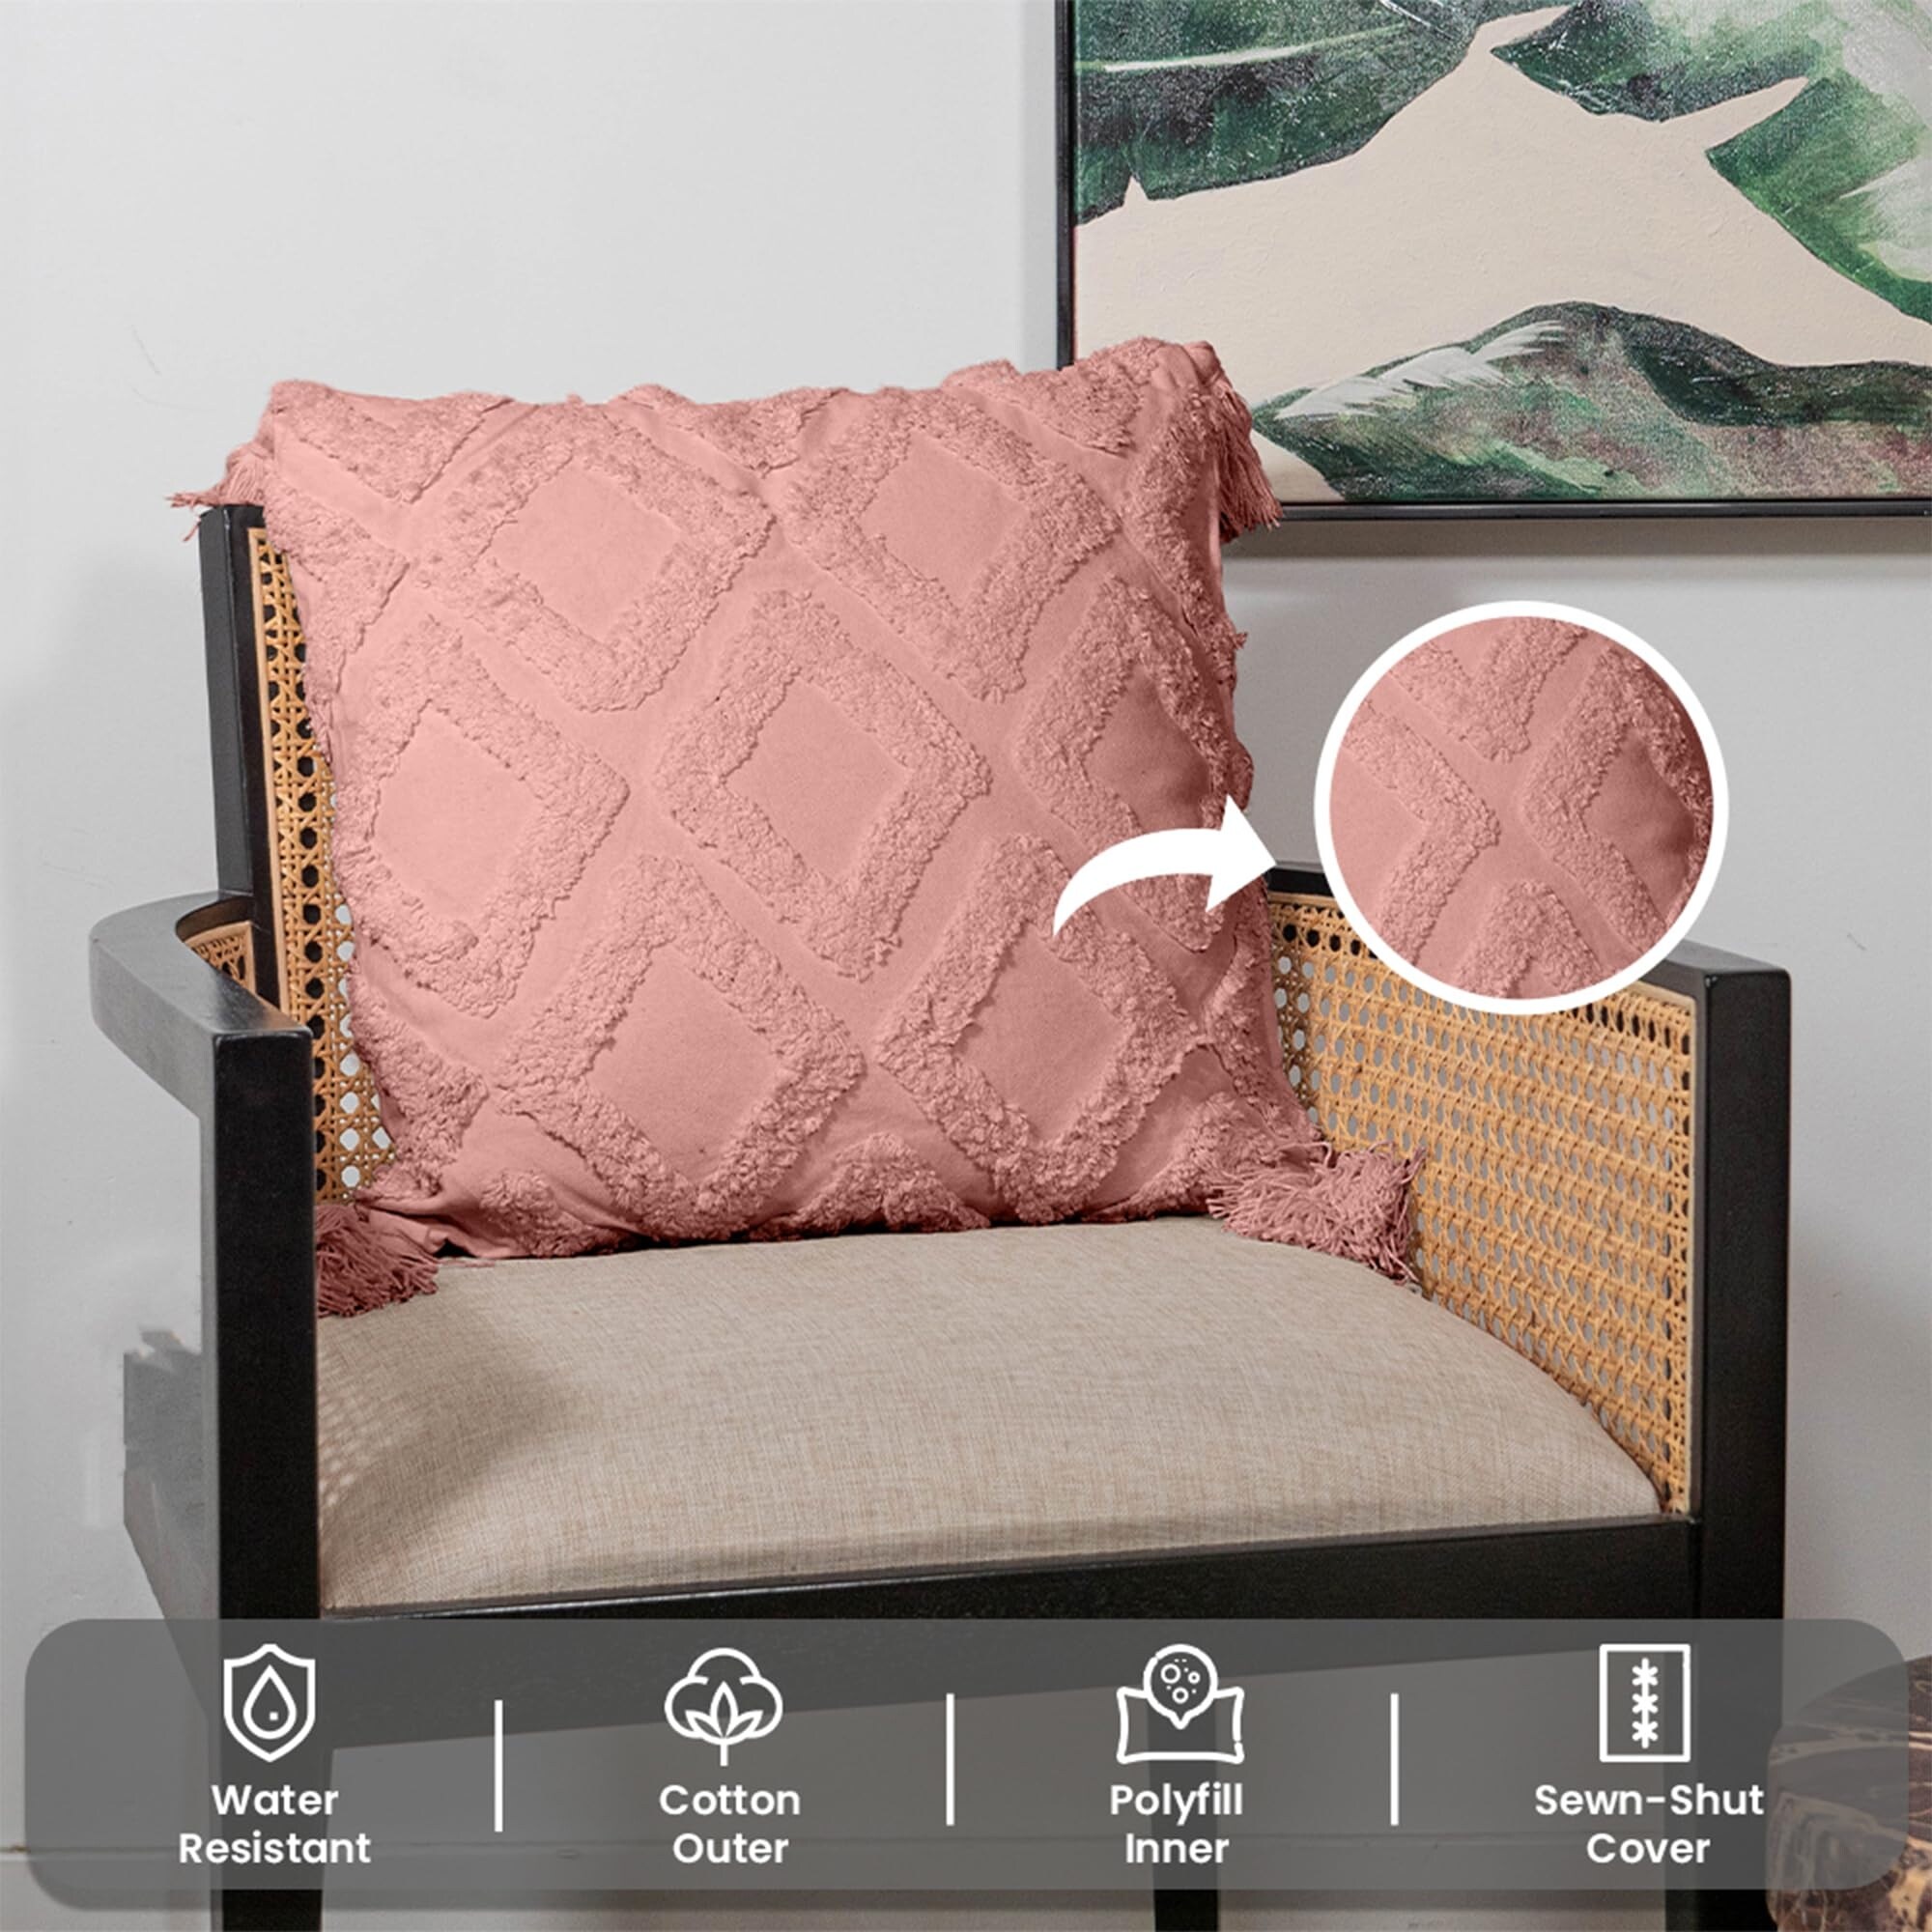 https://ak1.ostkcdn.com/images/products/is/images/direct/8a0945adae5a39ac02bca471285d1eed4fe0ad57/Sol-Living-Decorative-Pillows-Throw-Couch-Bedroom-Cushion.jpg